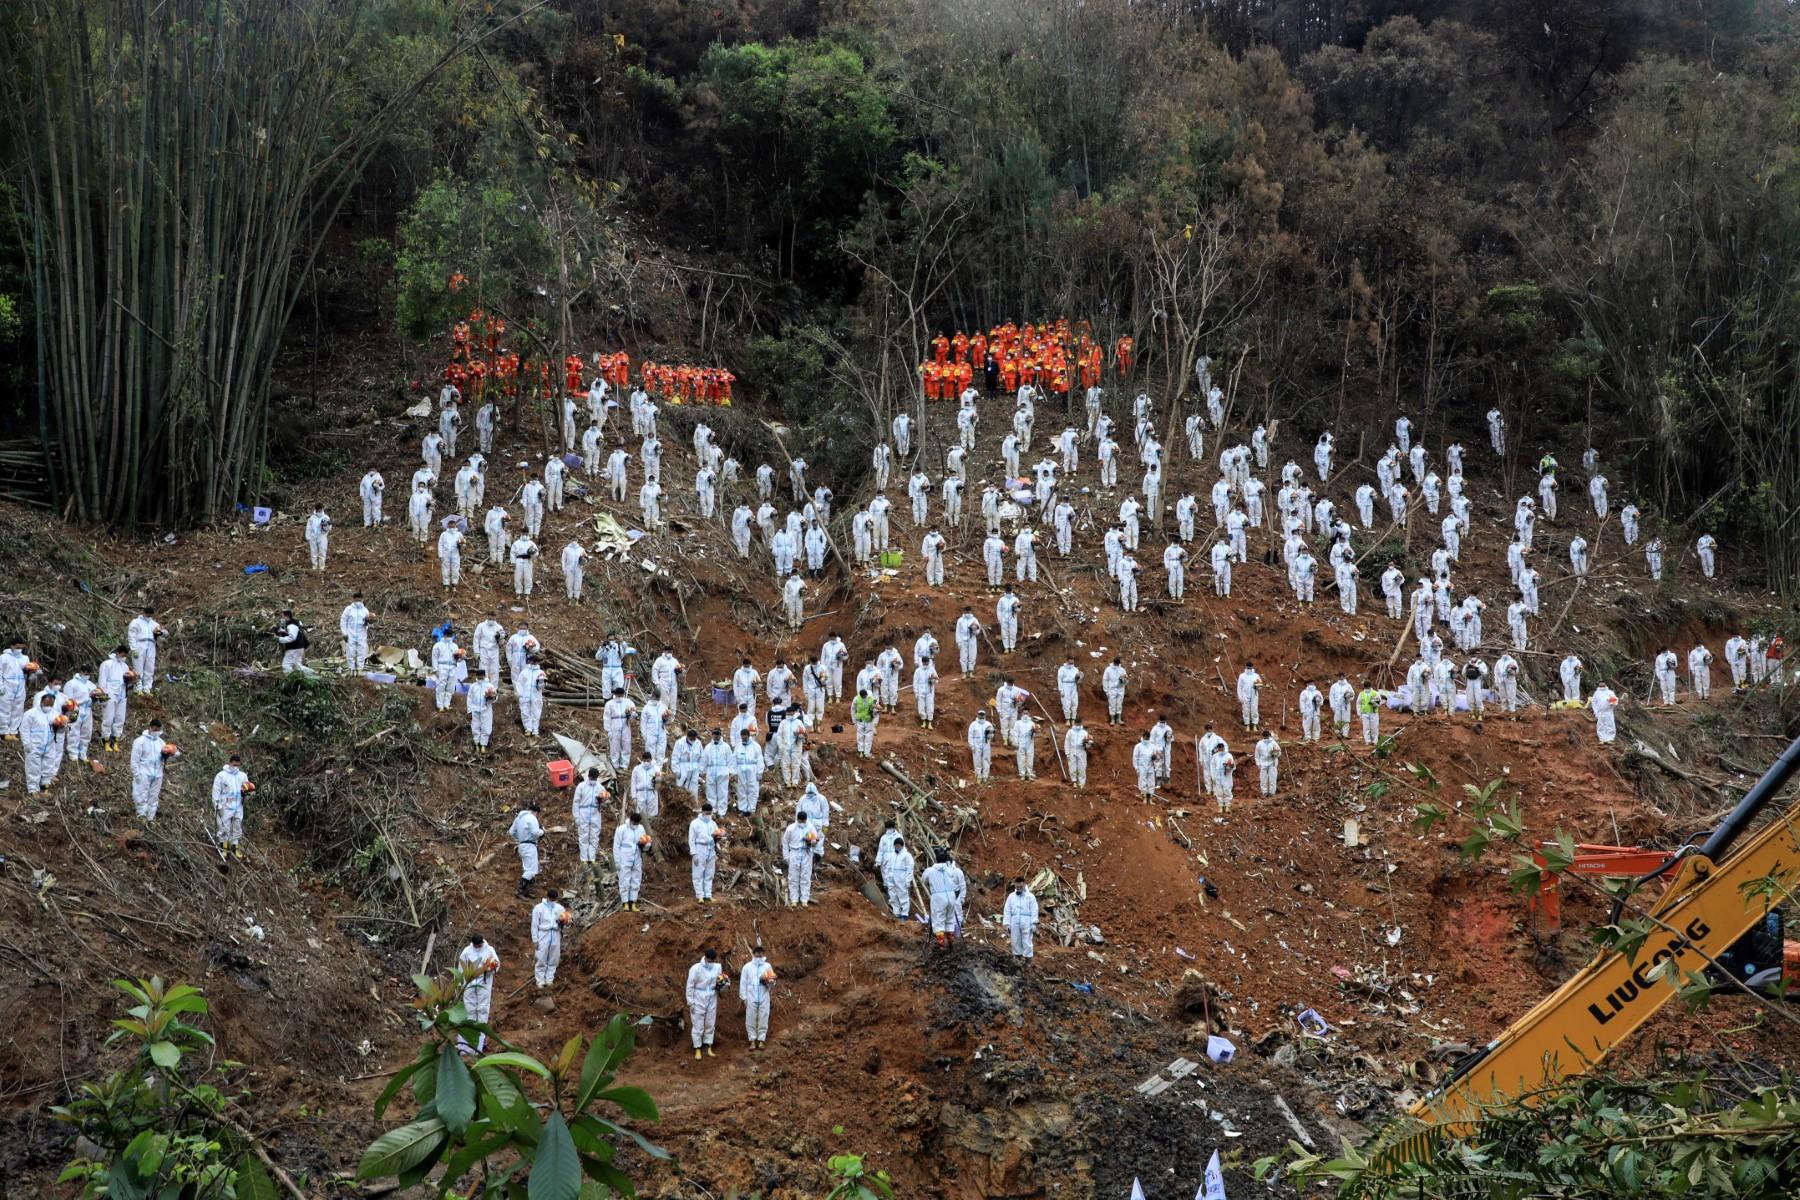 This photo taken on March 27 shows rescuers standing in a silent tribute for victims at the site of the China Eastern Airlines plane crash in Tengxian, Wuzhou, in China's southern Guangxi region. The Boeing 737-800 was flying between the cities of Kunming and Guangzhou on March 21 when it nosedived into a mountainside, disintegrating on impact and killing all 132 people on board. Photo: AFP